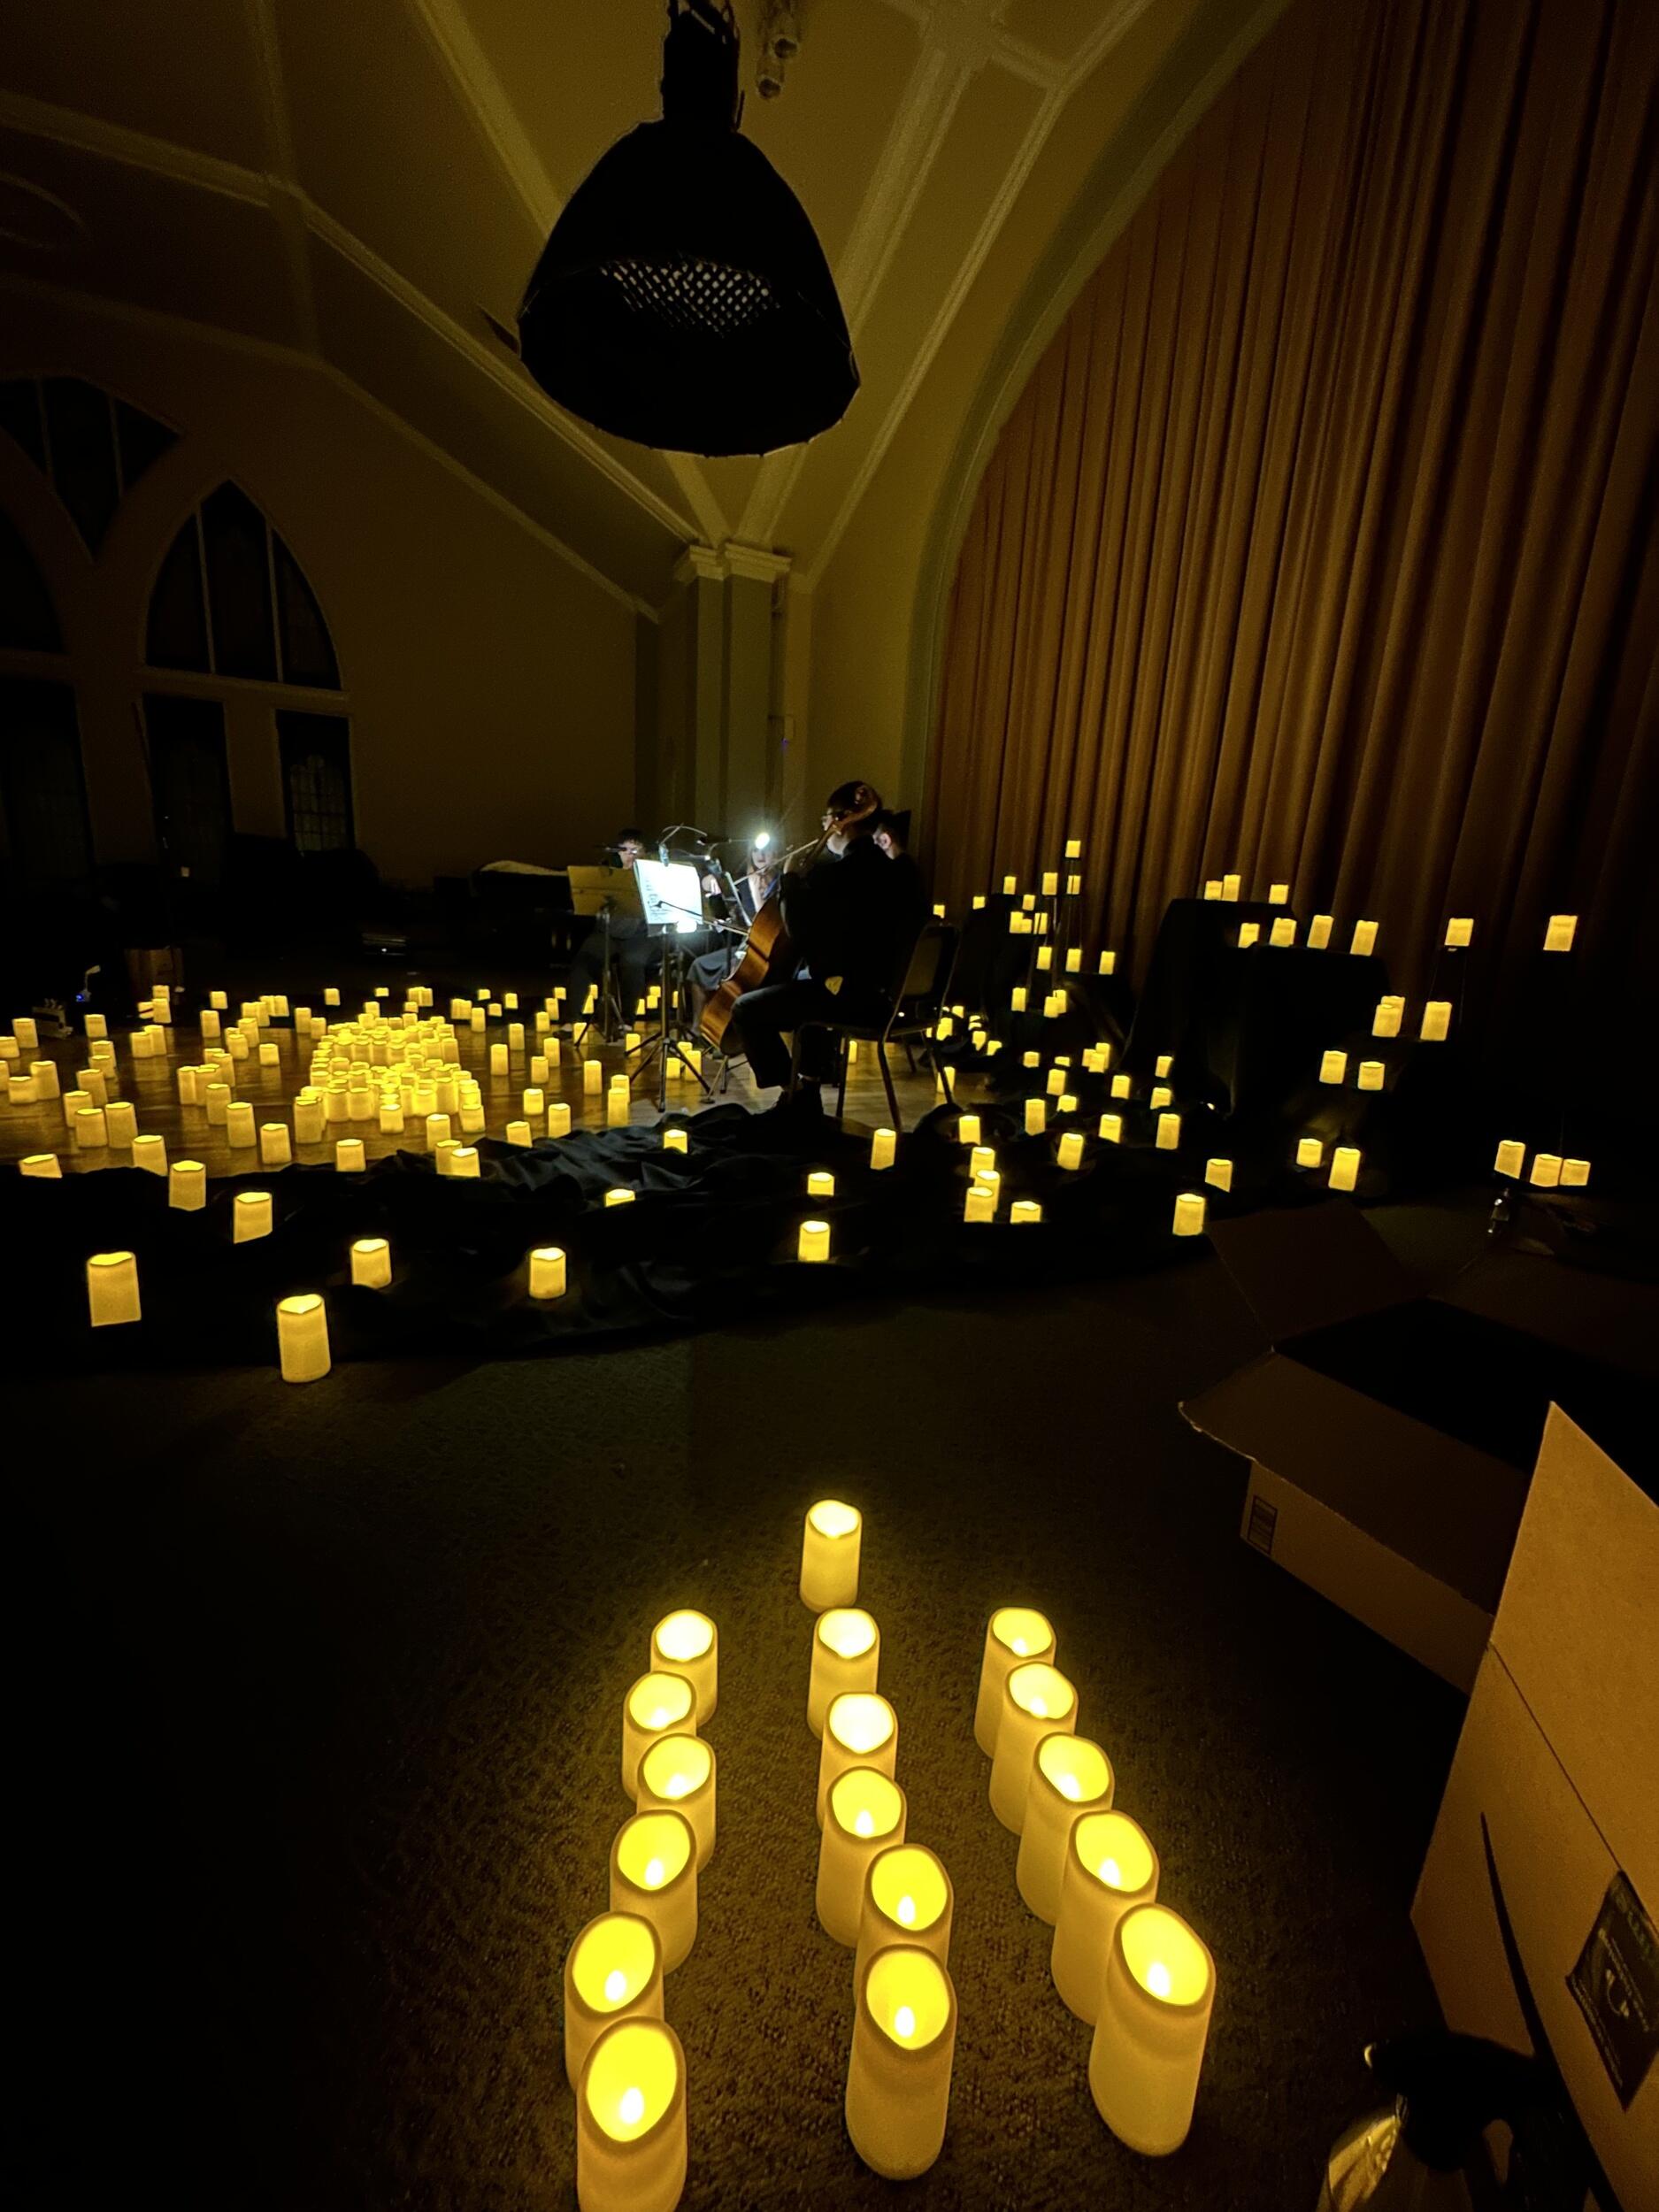 Hundreds of candles surround musicians on a dark stage.